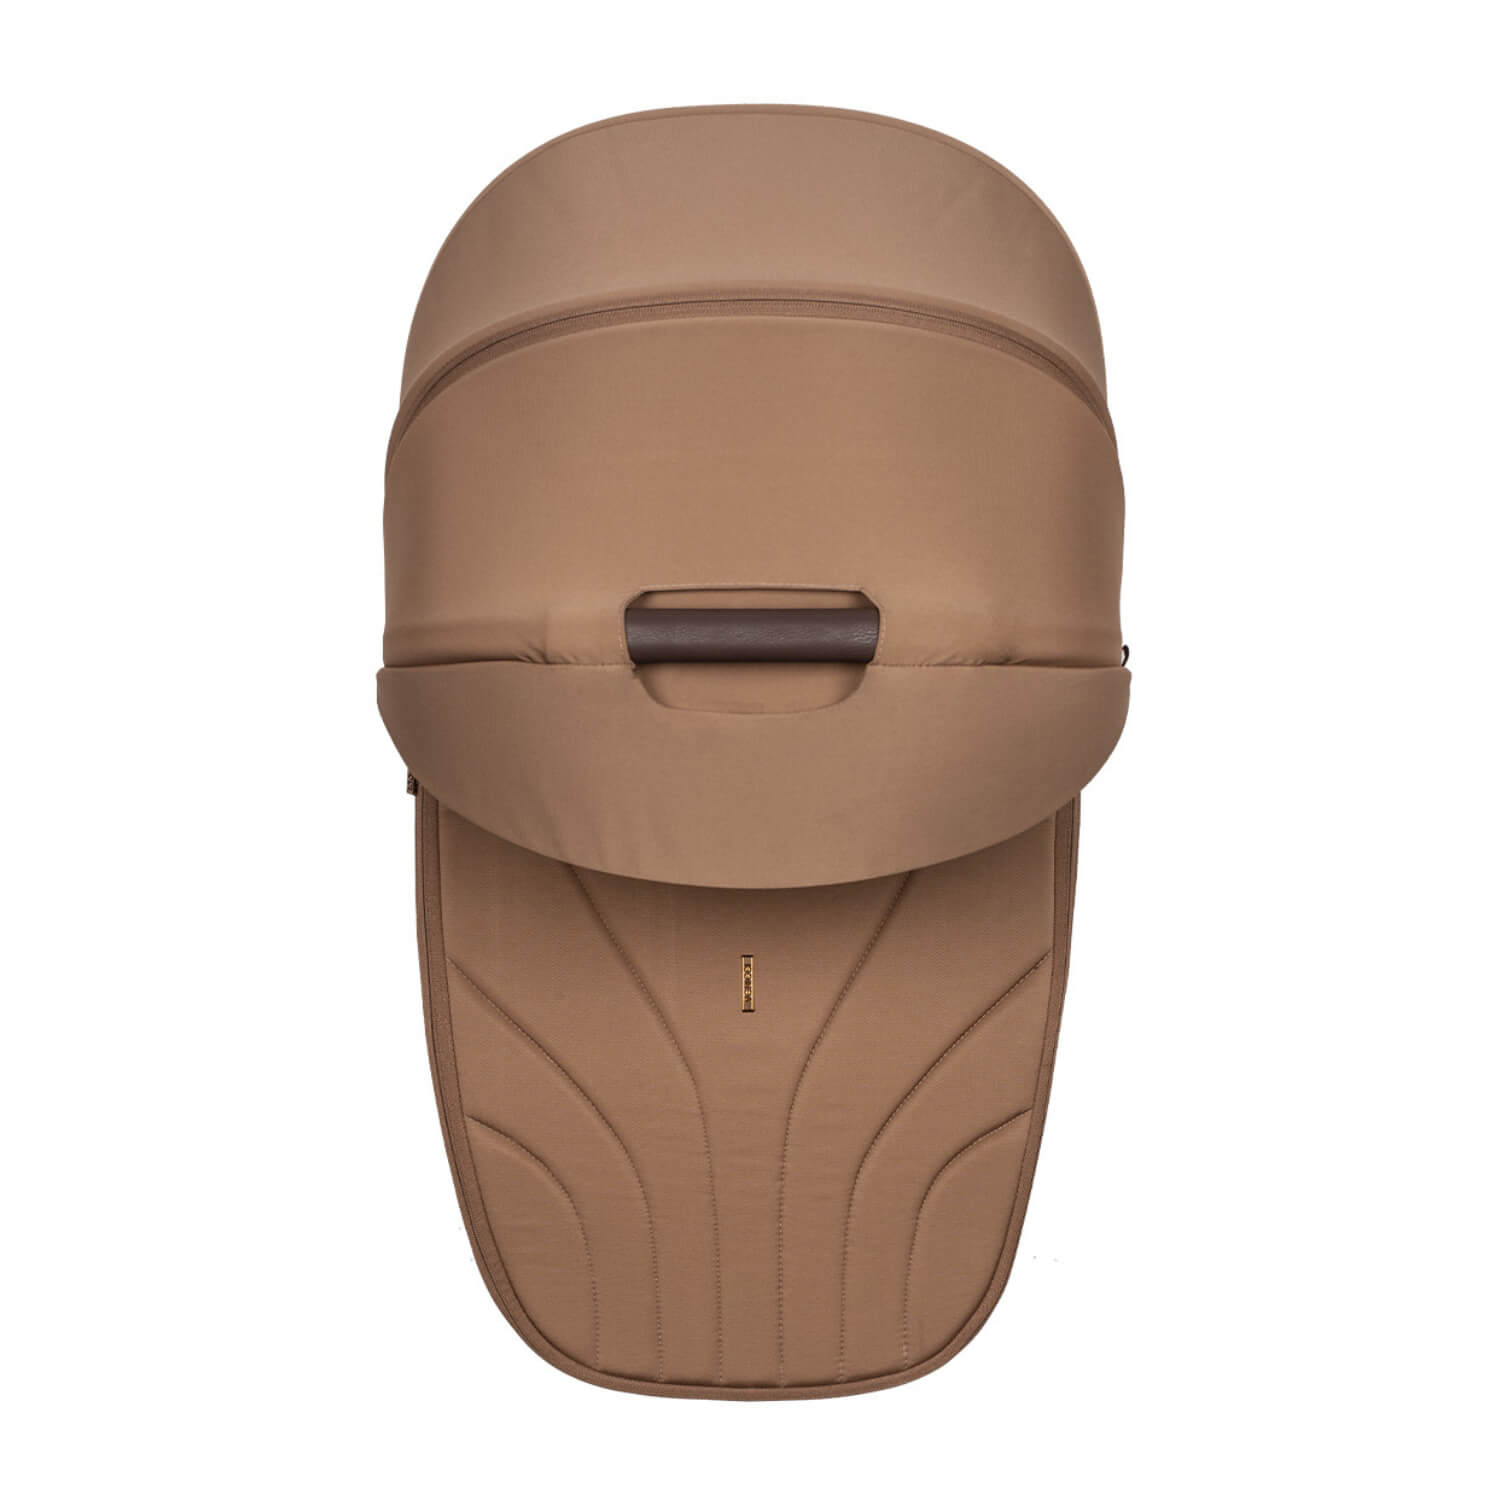 Top view of Venicci Claro's carrycot in Caramel brown colour